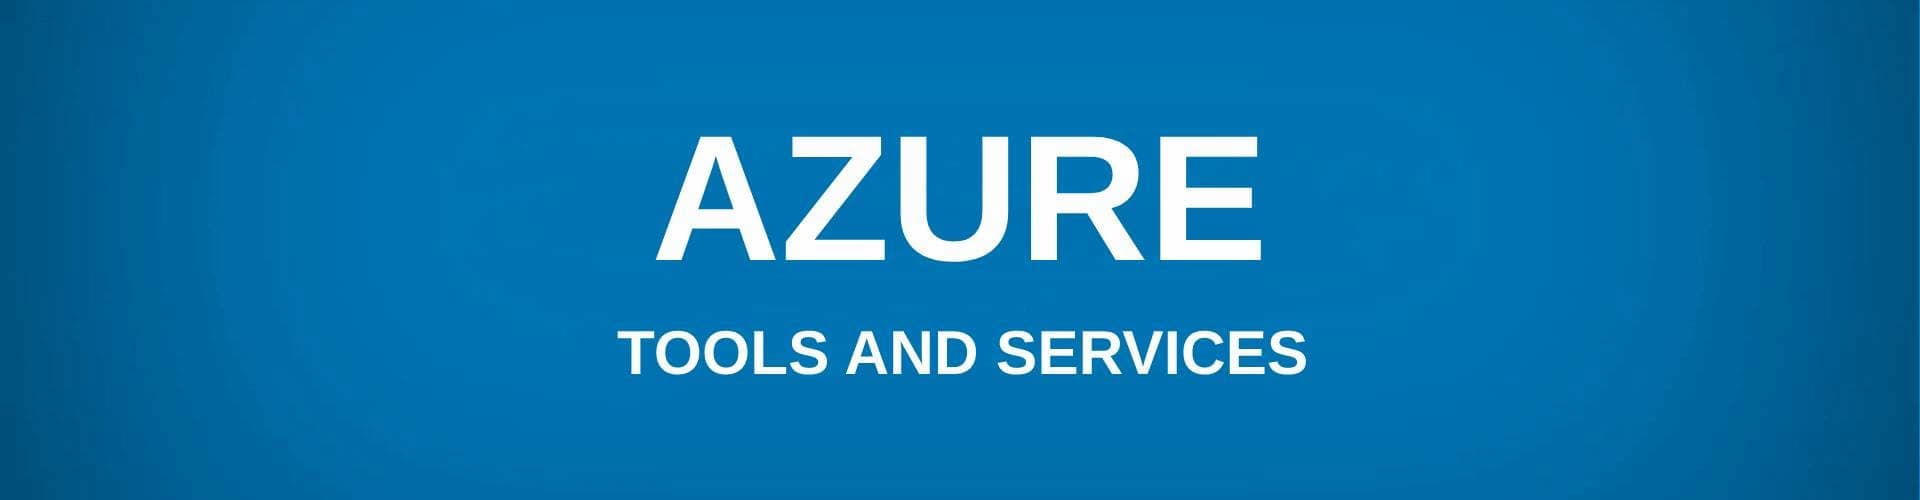 azure-tools-and-services